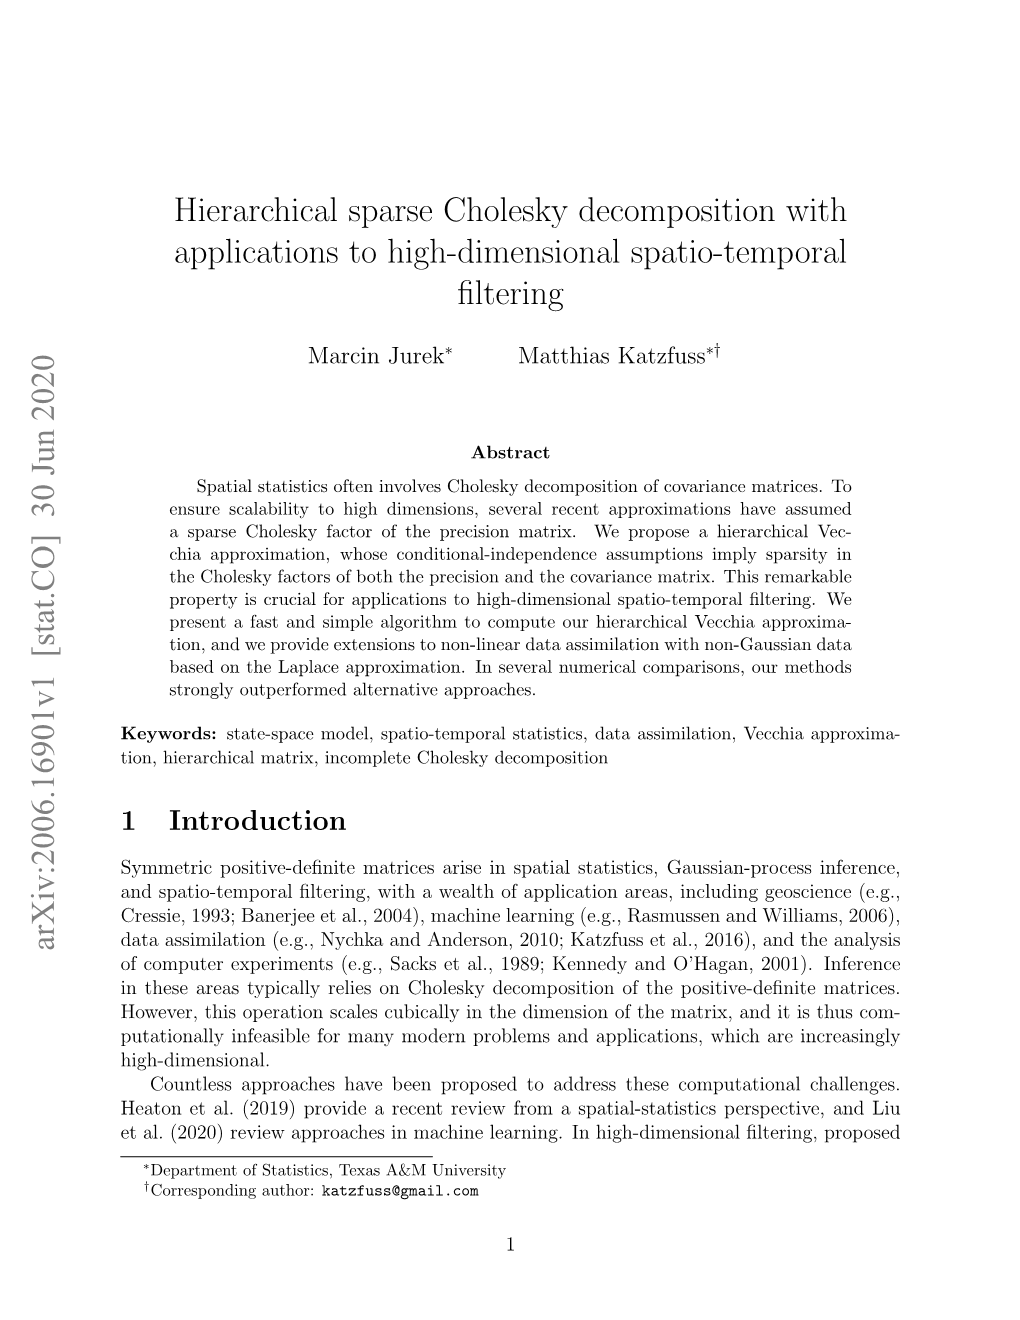 Hierarchical Sparse Cholesky Decomposition with Applications to High-Dimensional Spatio-Temporal ﬁltering